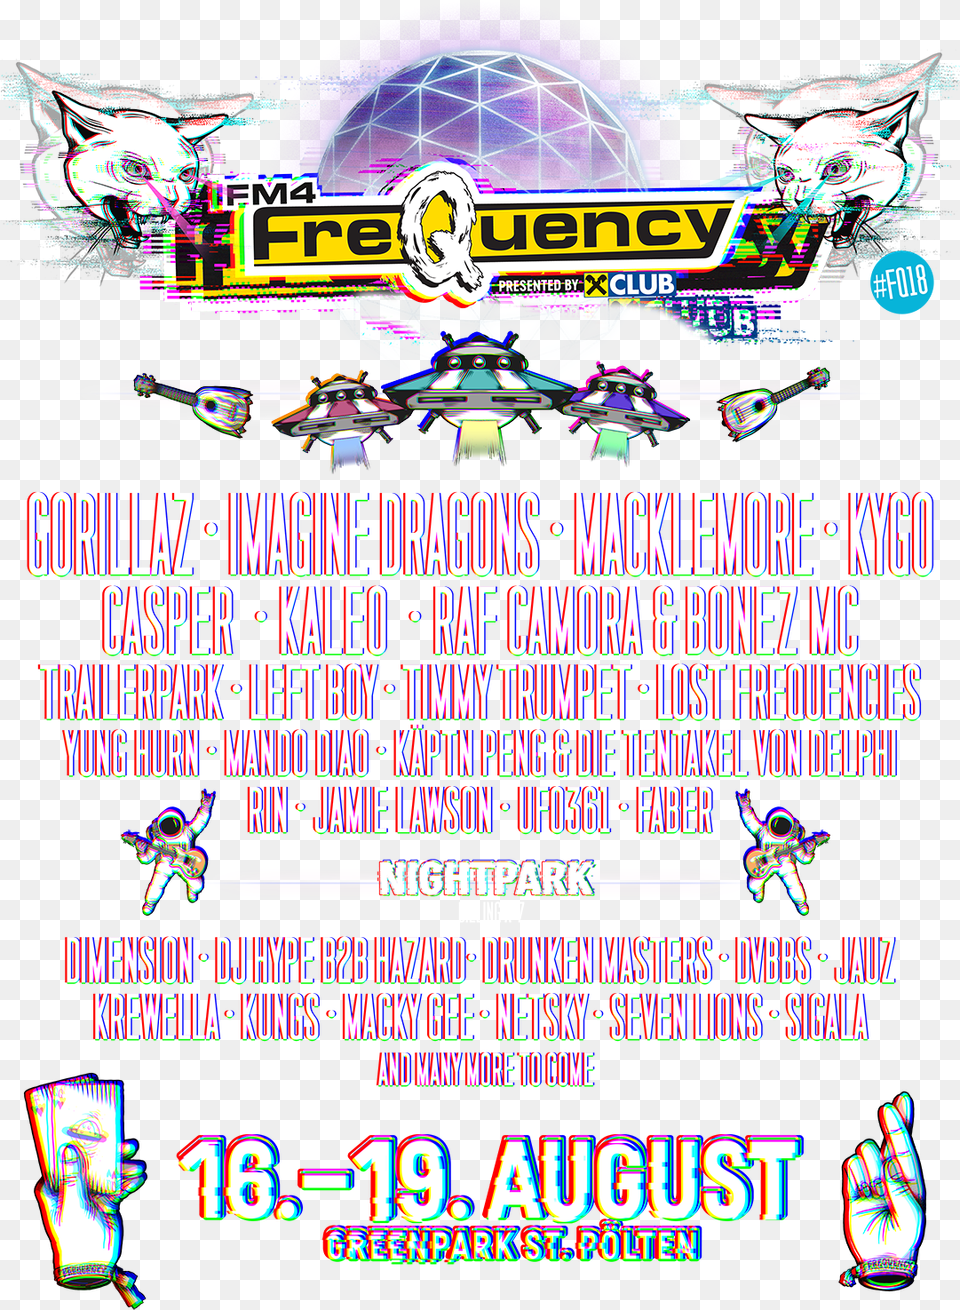 Imagine Dragons Announced As Headliner For Fm4 Frequency Airplane, Advertisement, Poster, Baby, Person Free Png